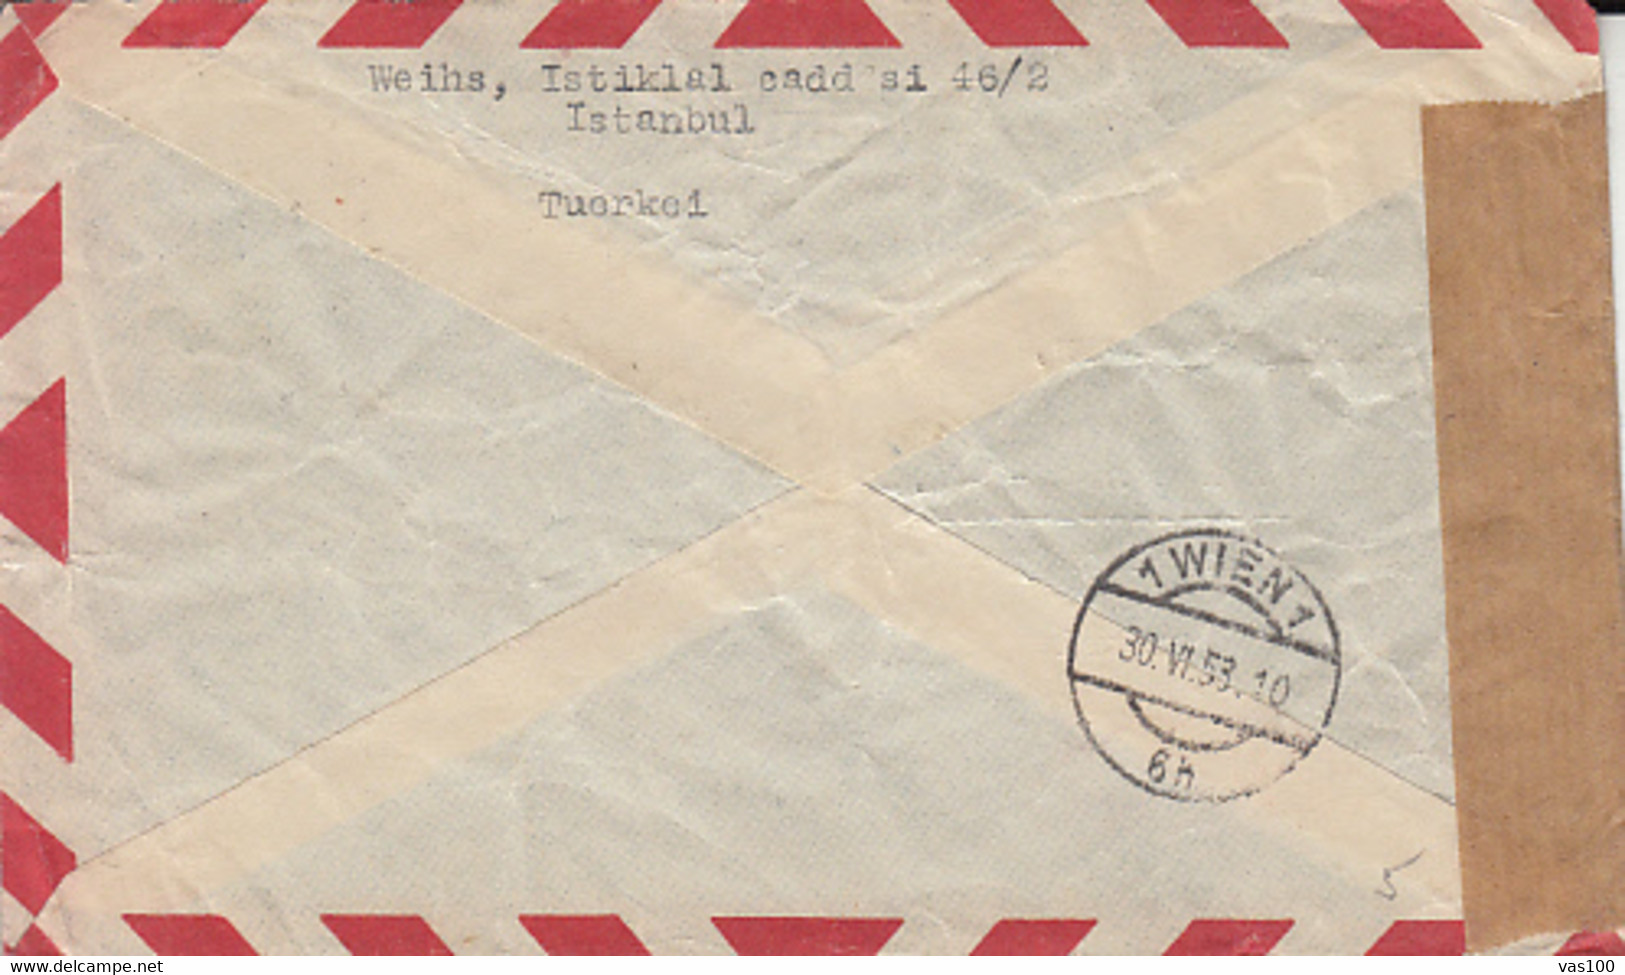 ISTANBUL STREET VIEW, STAMP ON CENSORED NR 184 COVER, 1953, TURKEY - Covers & Documents